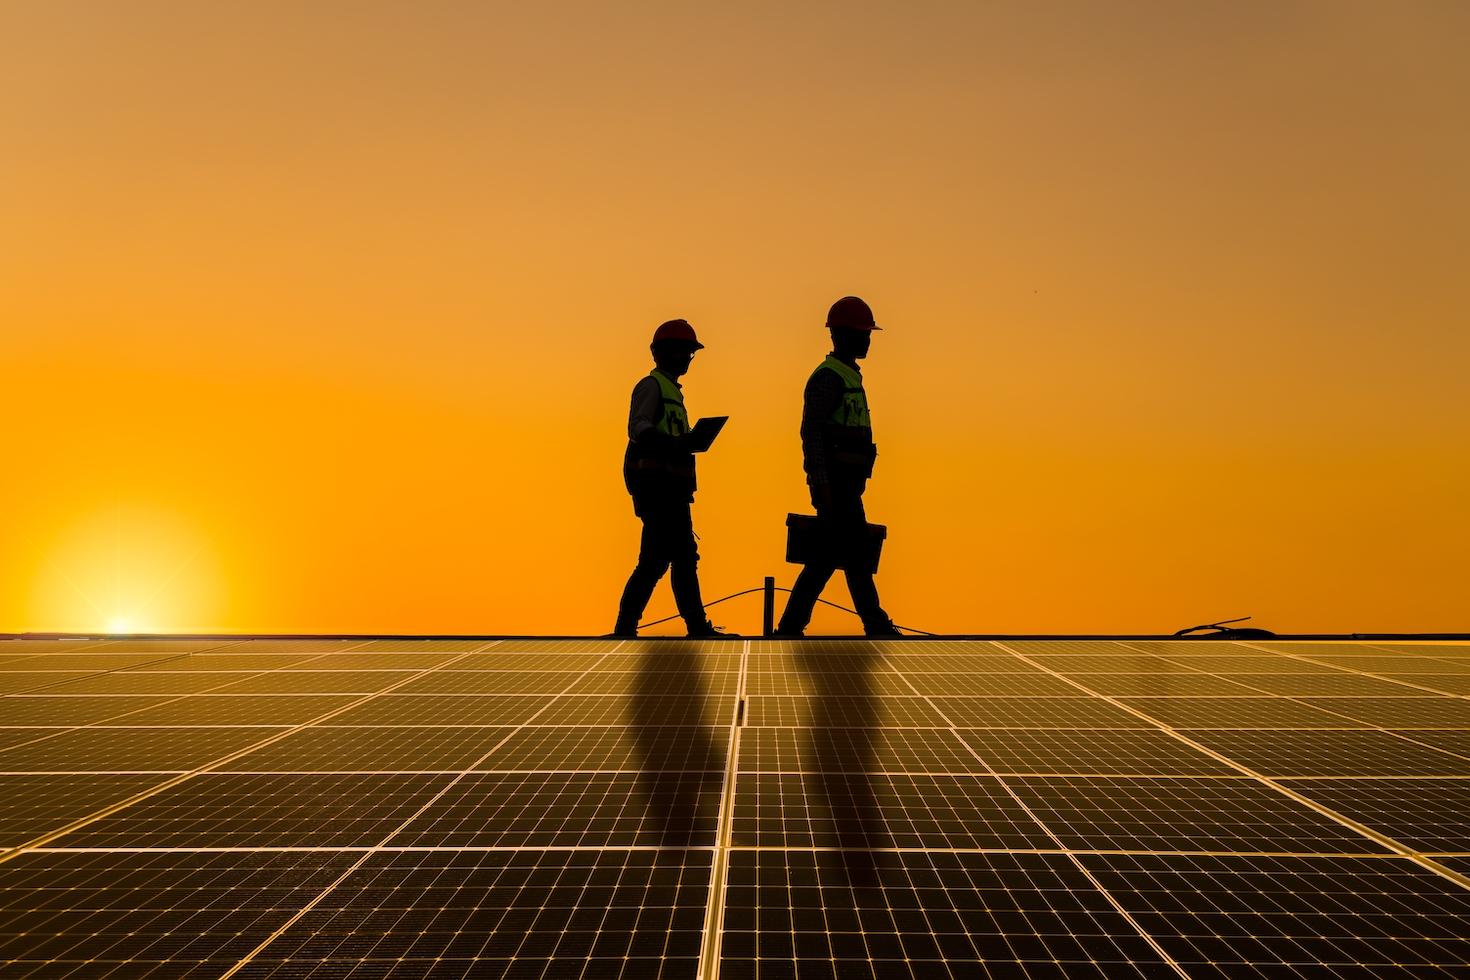 2 engineers walking on roof to inspect a solar panel